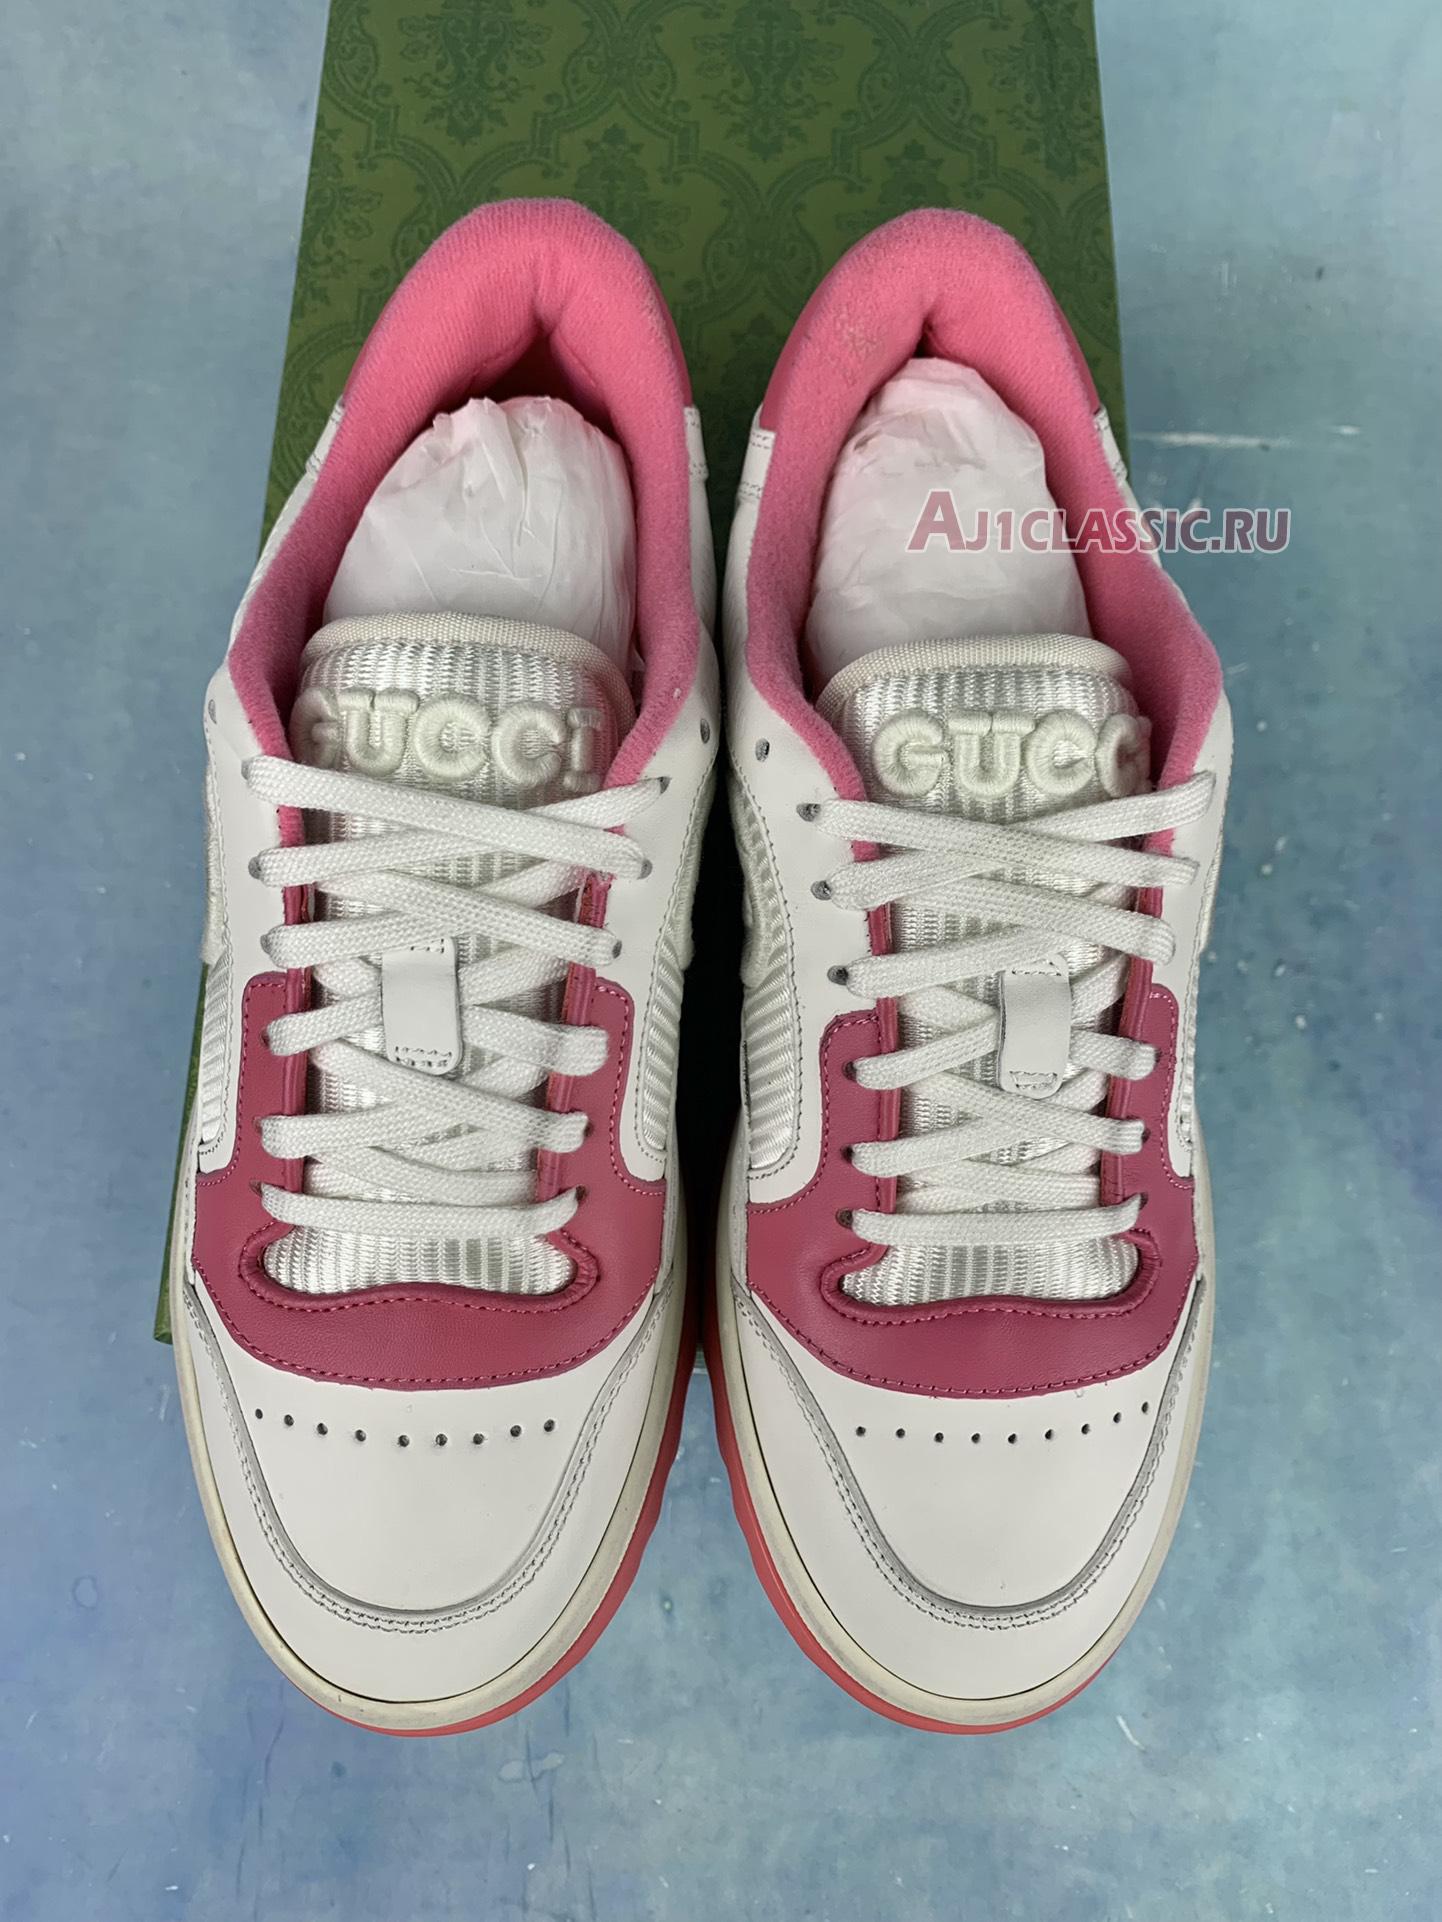 Gucci MAC80 Sneaker "Off White Pink" 749909 AAB79 9152